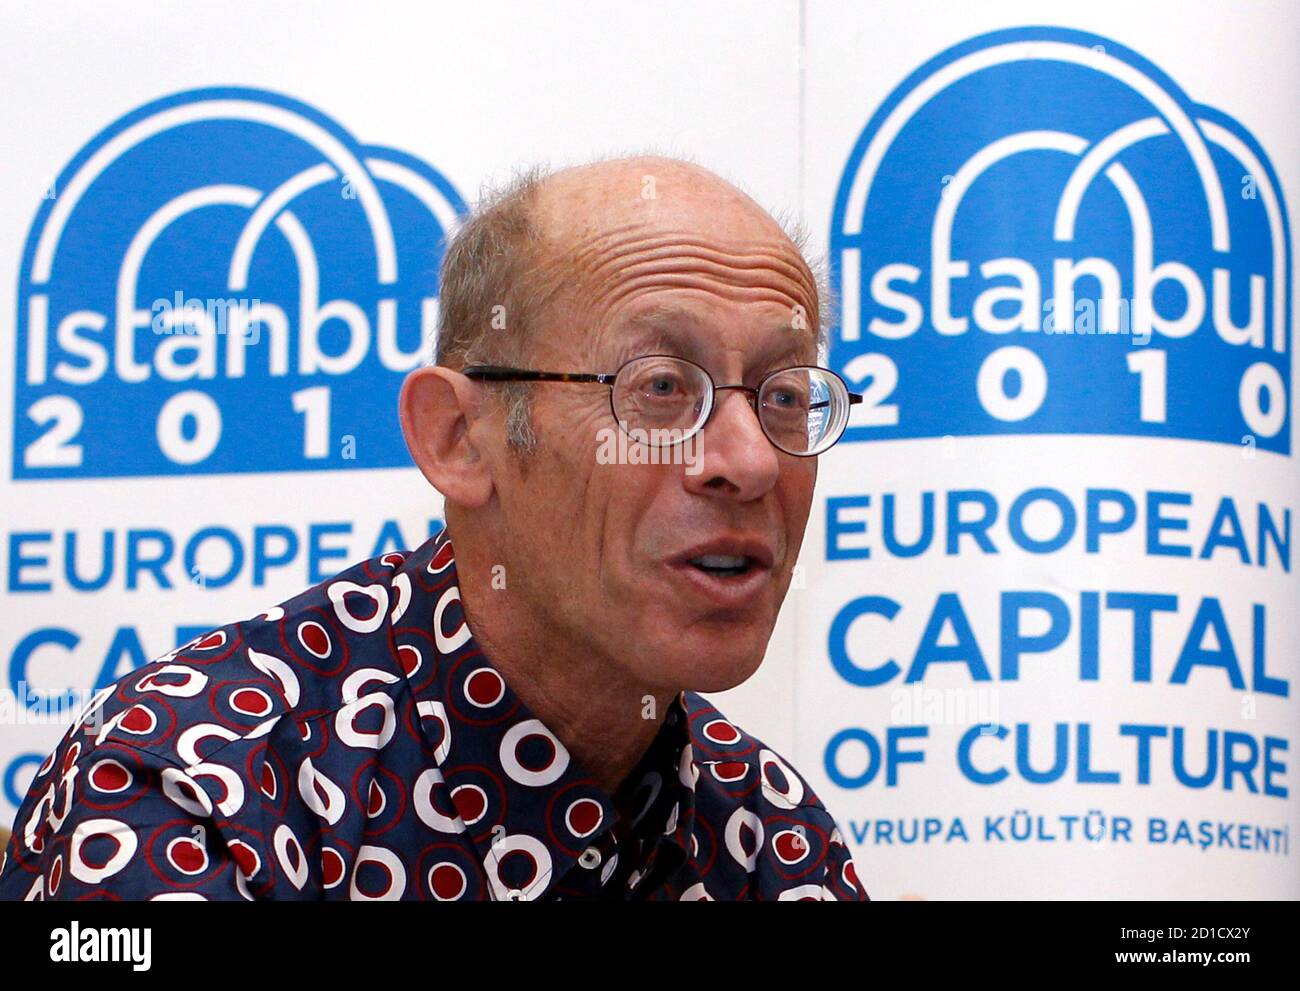 Australian pianist David Helfgott attends a news conference in Istanbul  April 5, 2010. Helfgott will stage two sold-out shows in Istanbul. The  performances are being organized with contributions from the Culture and